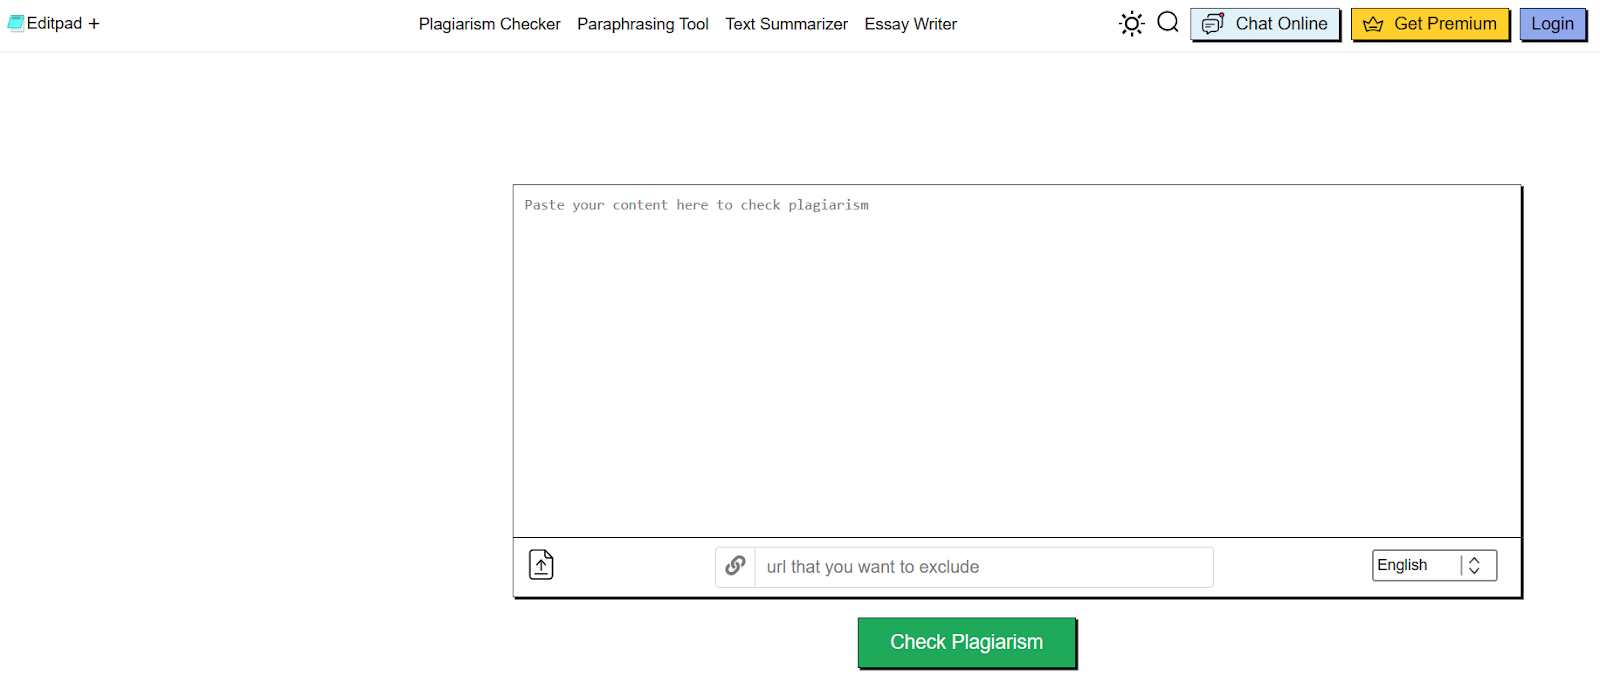 Plagiarism_Checker_by_EditPad.png